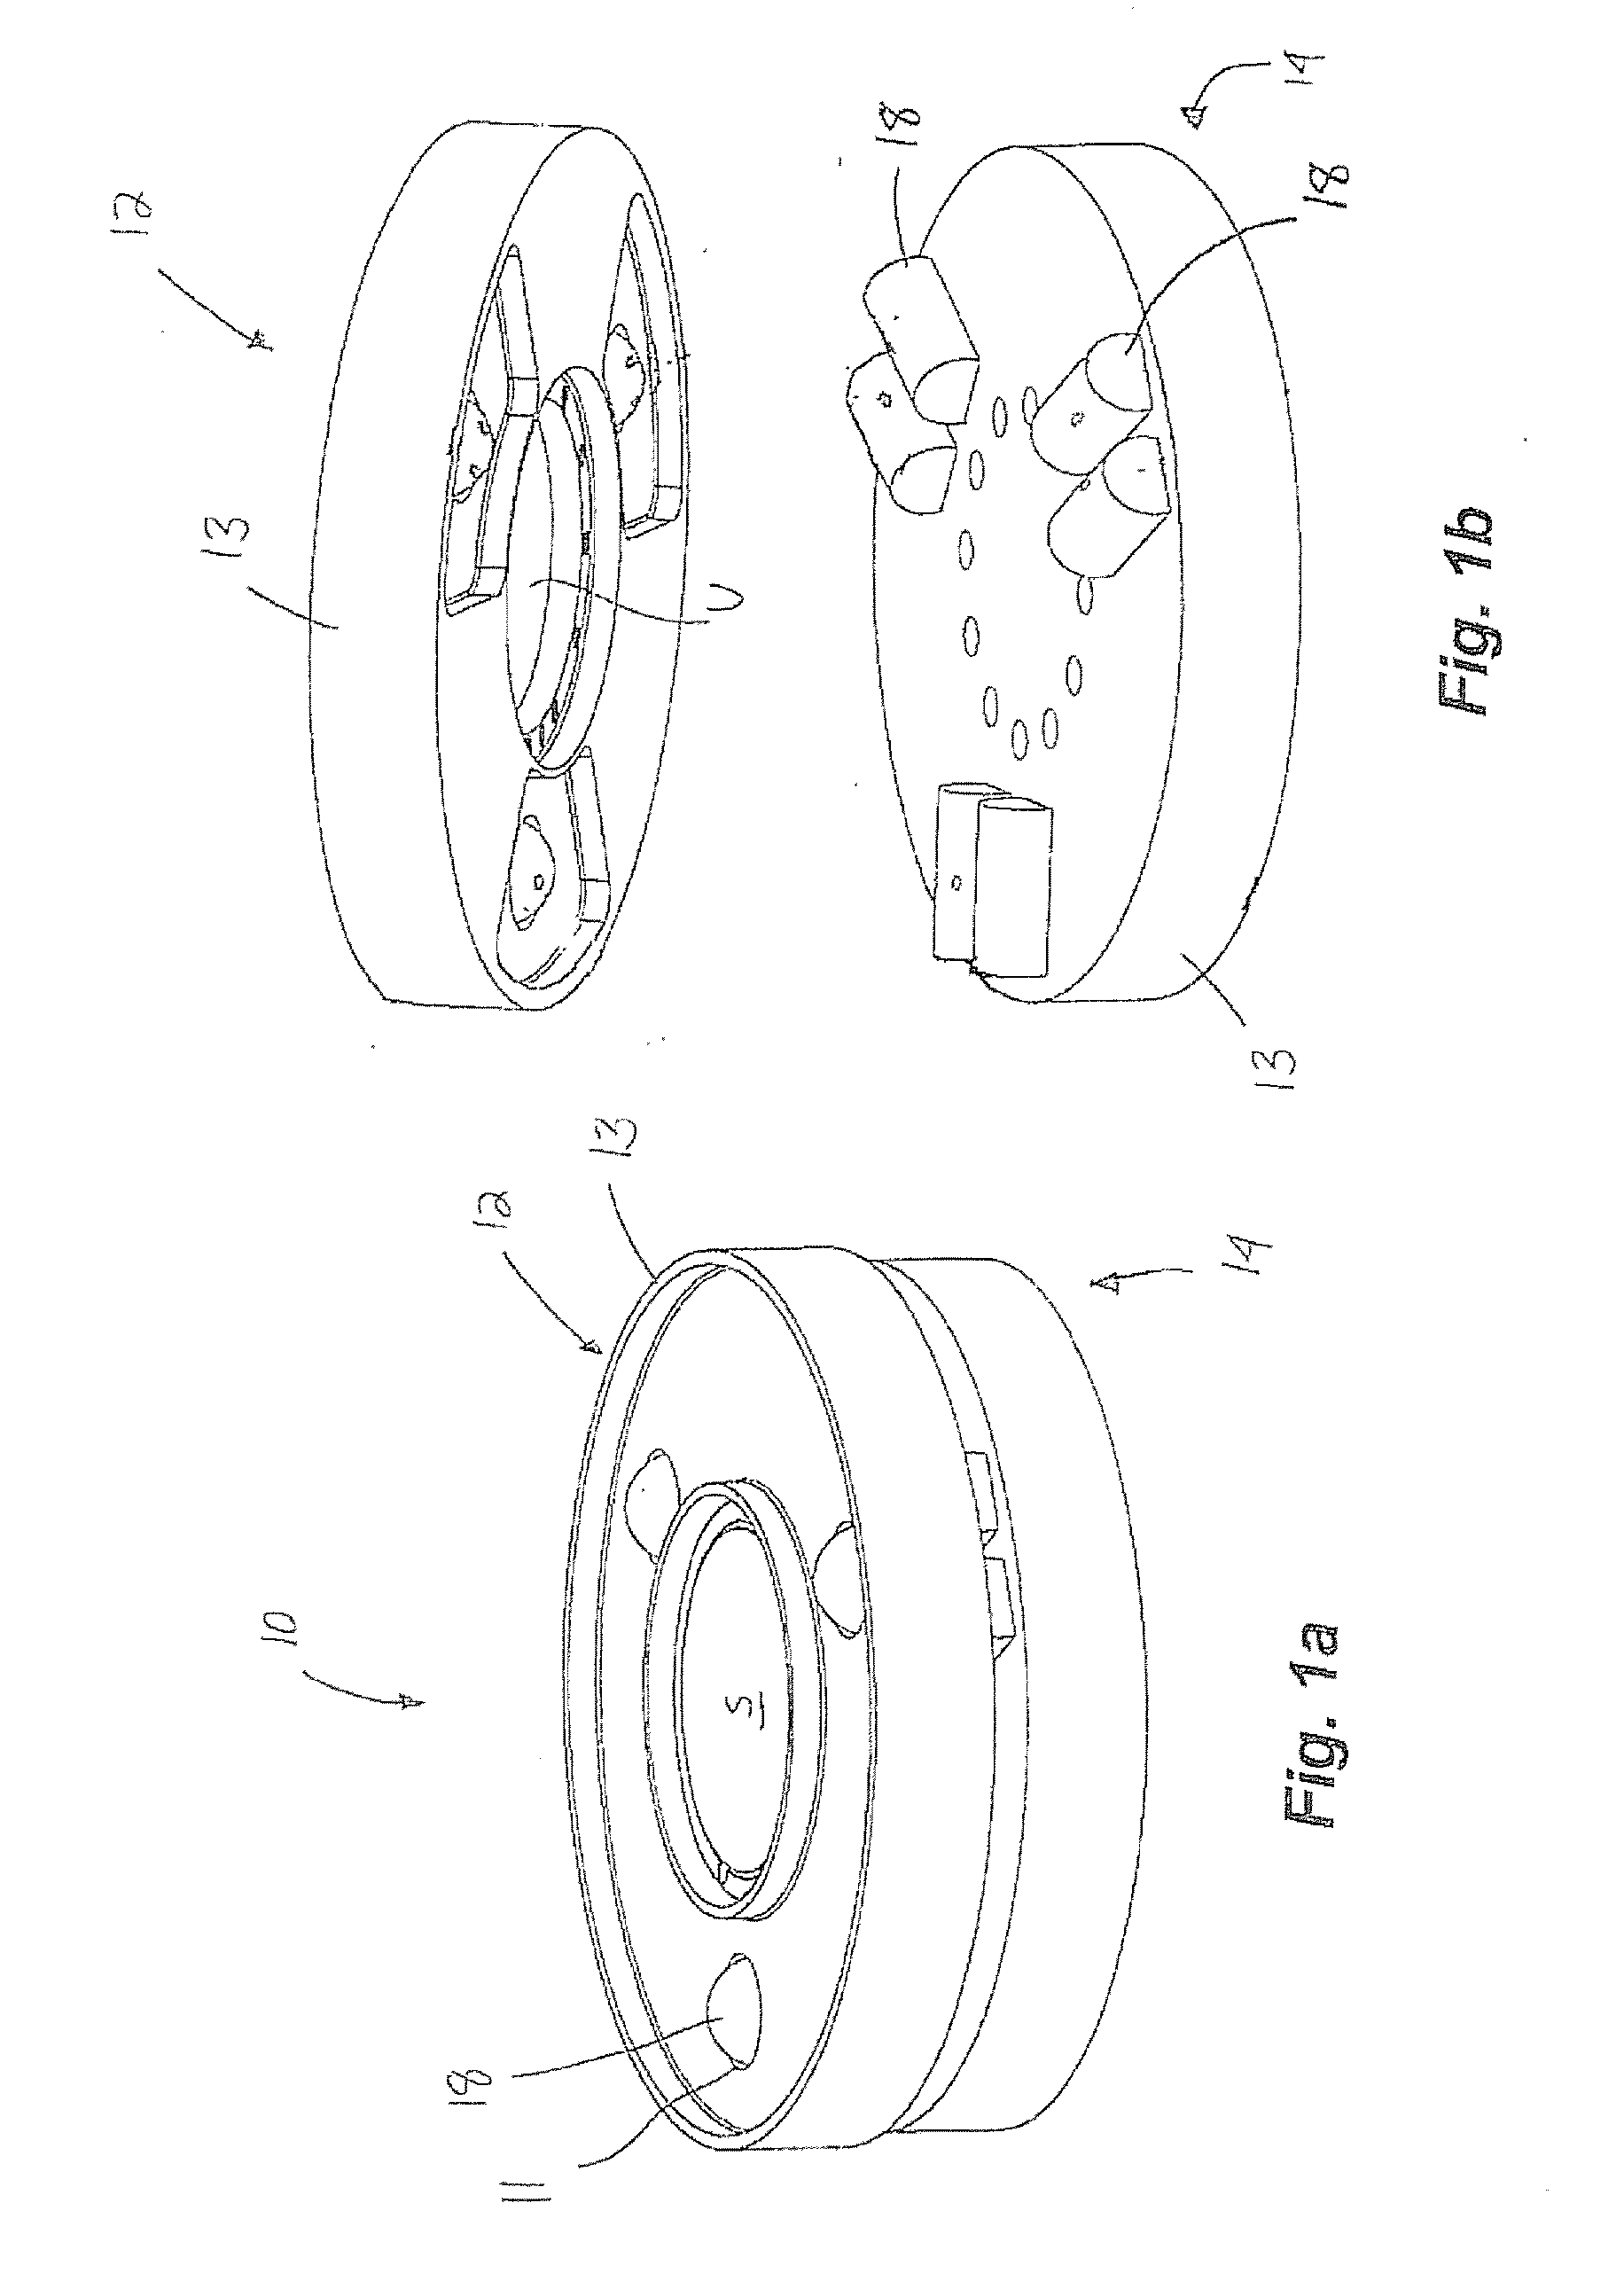 Apparatus and methods for forming kinematic coupling components